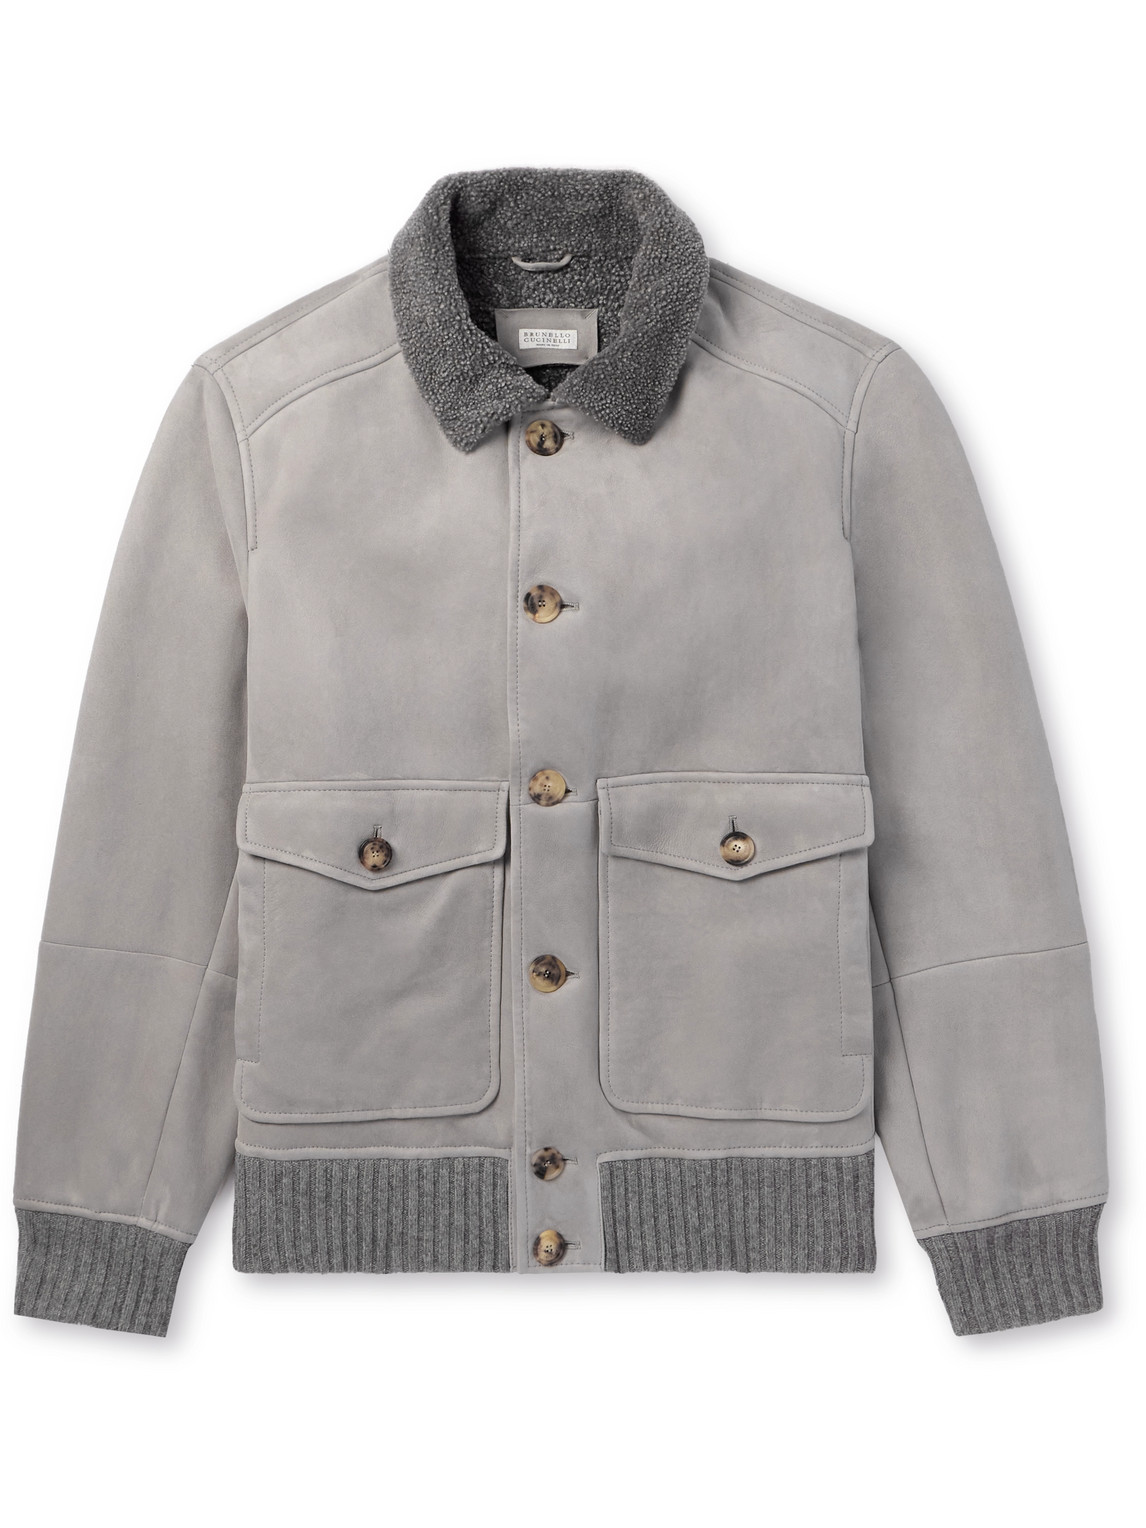 Brunello Cucinelli Shearling Bomber Jacket In Gray